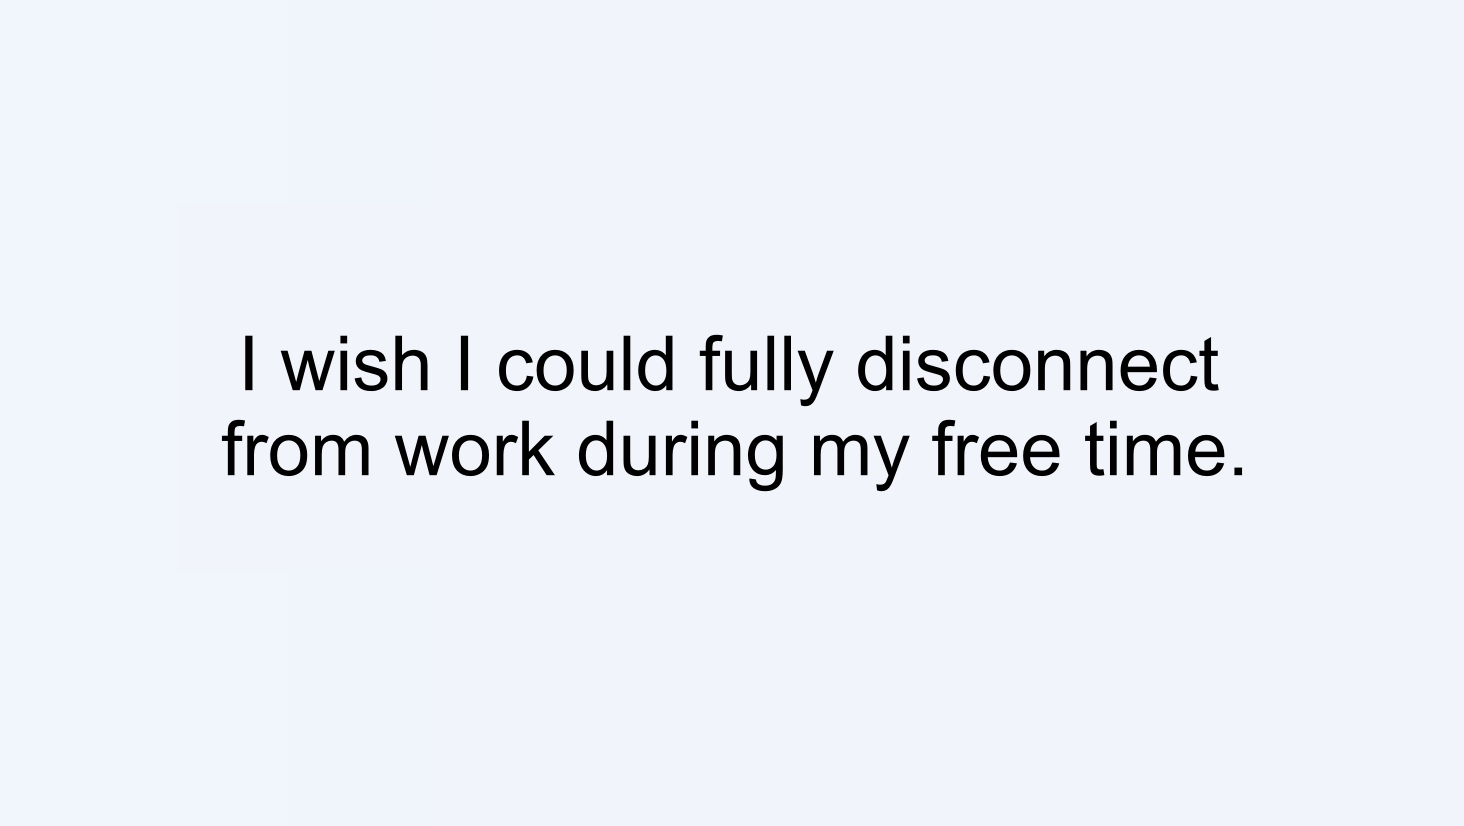 I wish I could fully disconnect from work during my free time.